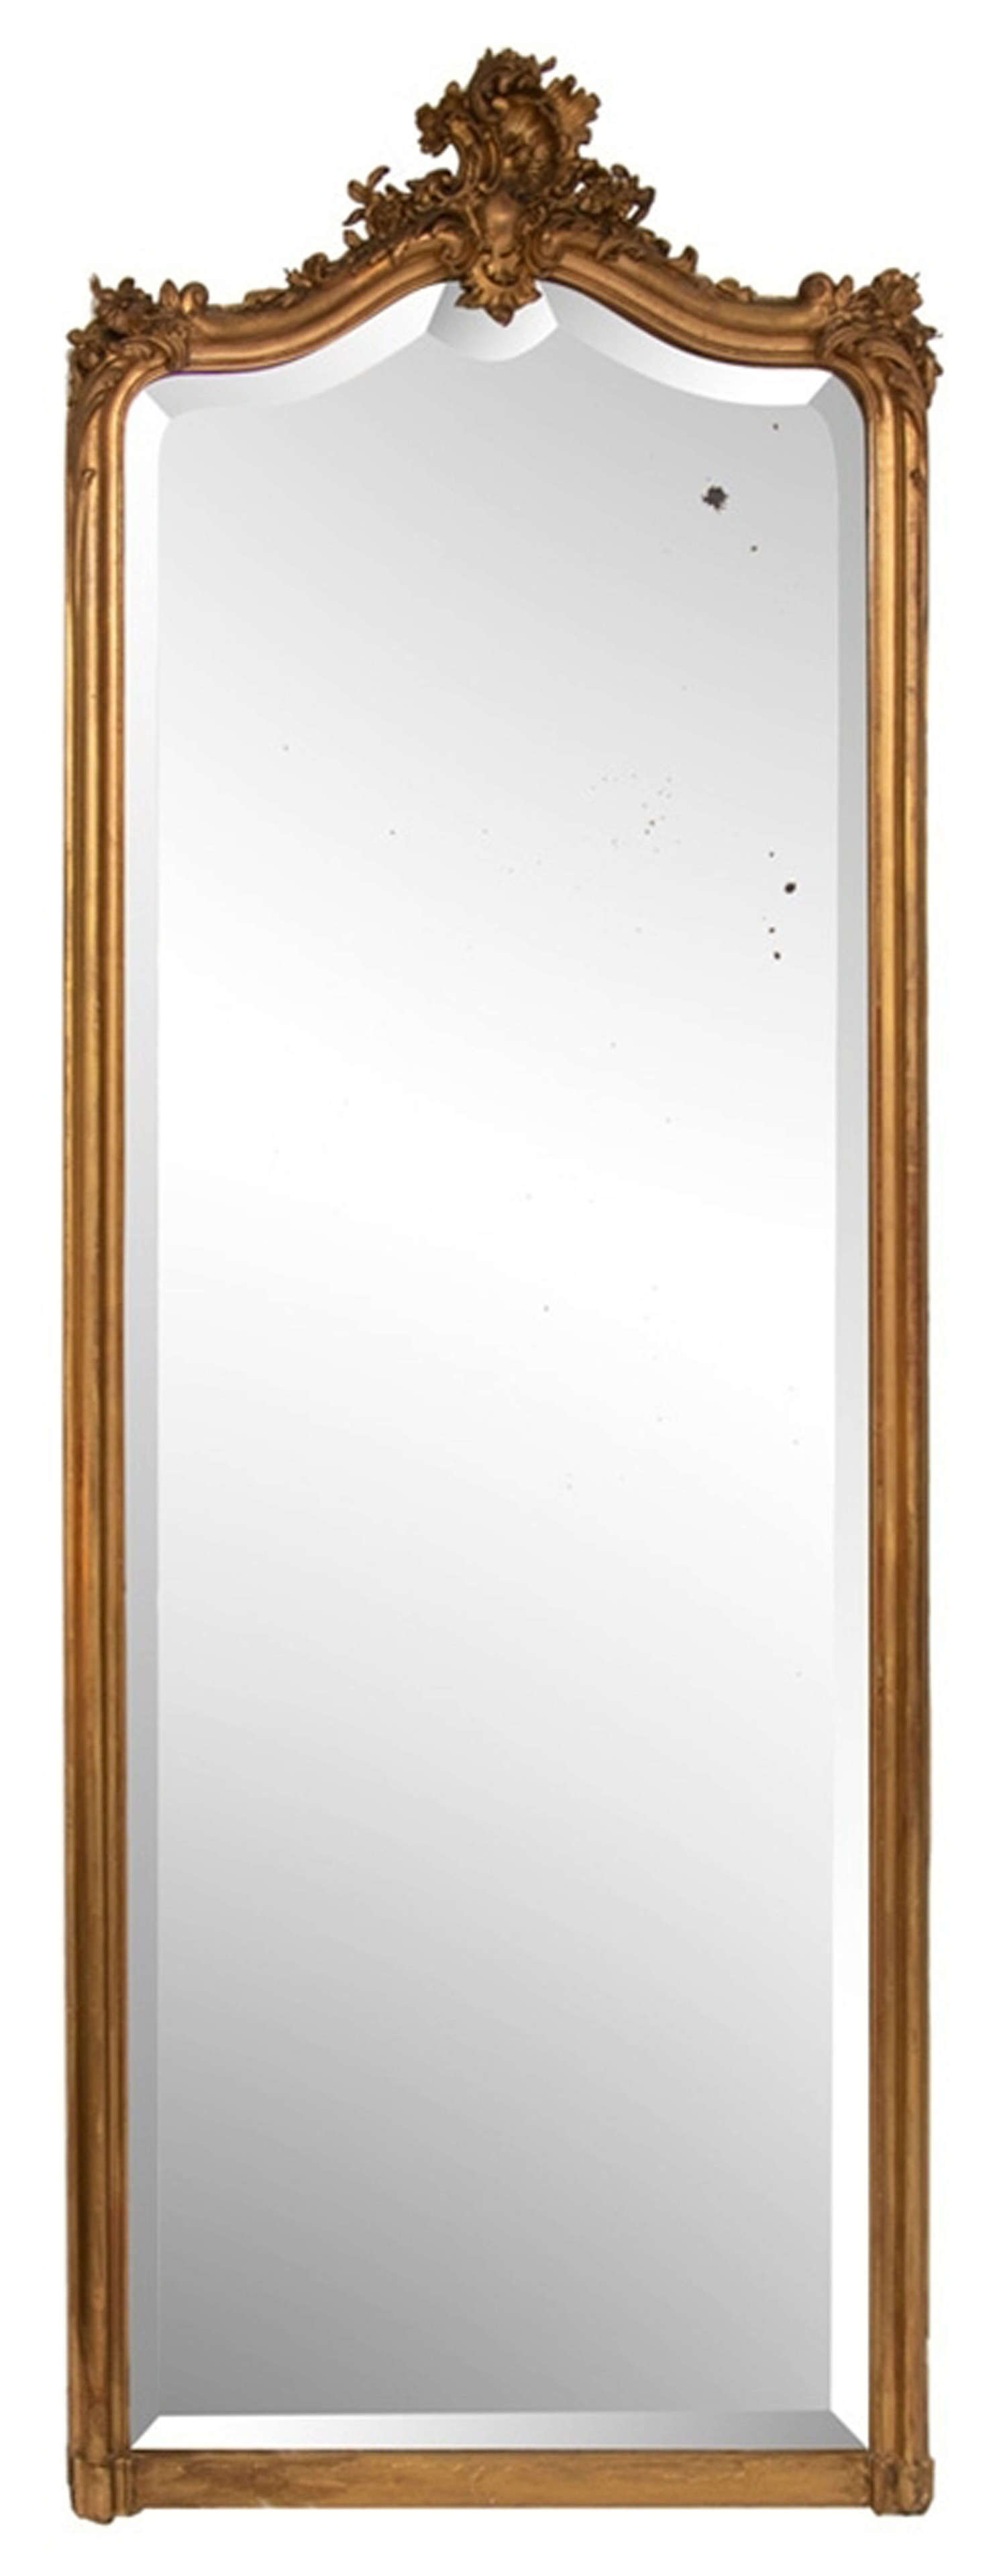 An antique gilded full-length mirror in Antique Large Mirrors